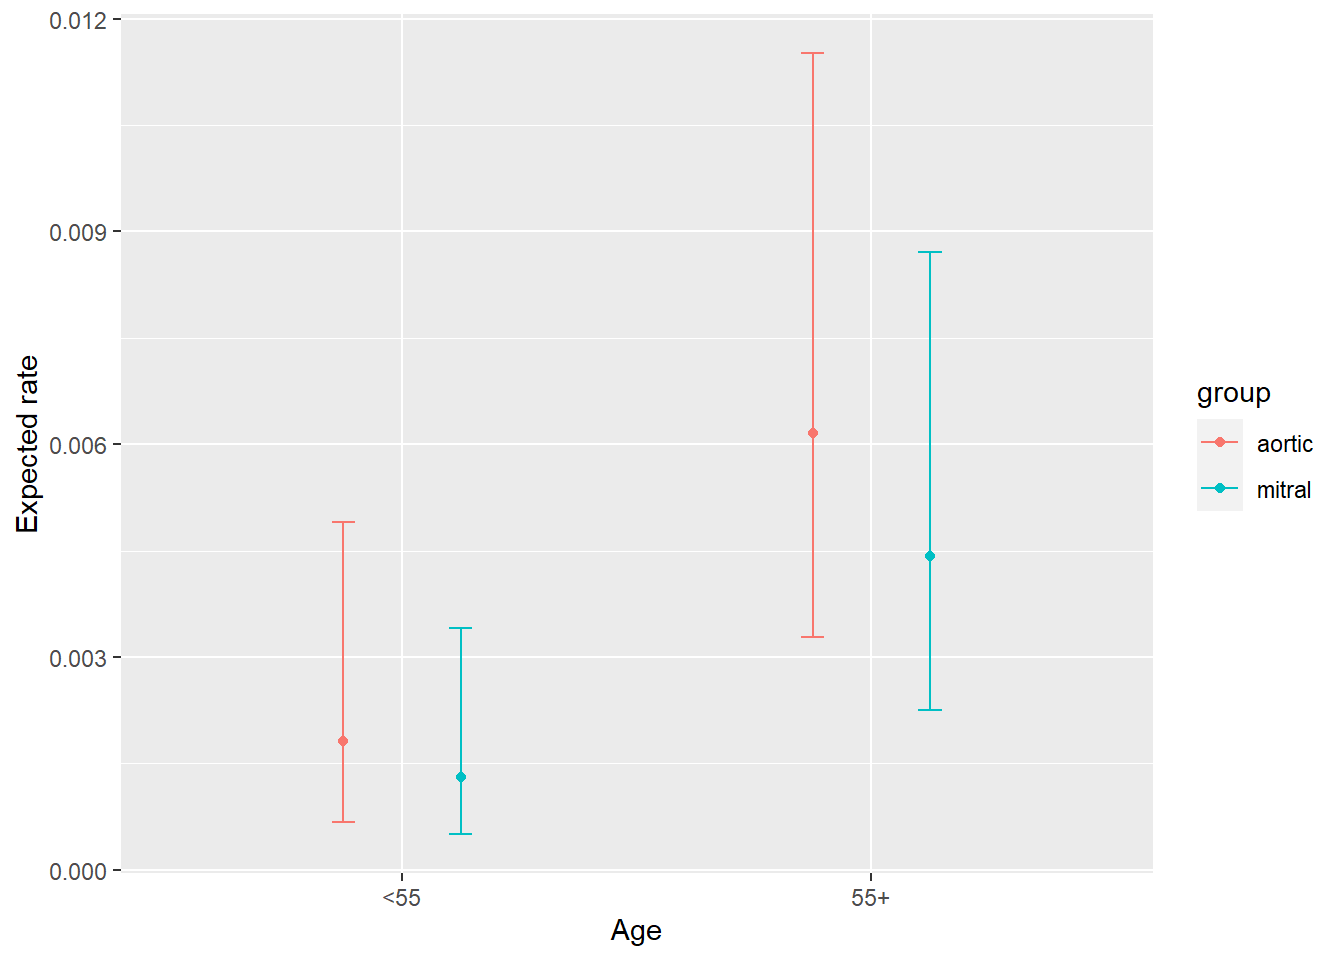 expected death rate by age group and heart valve group